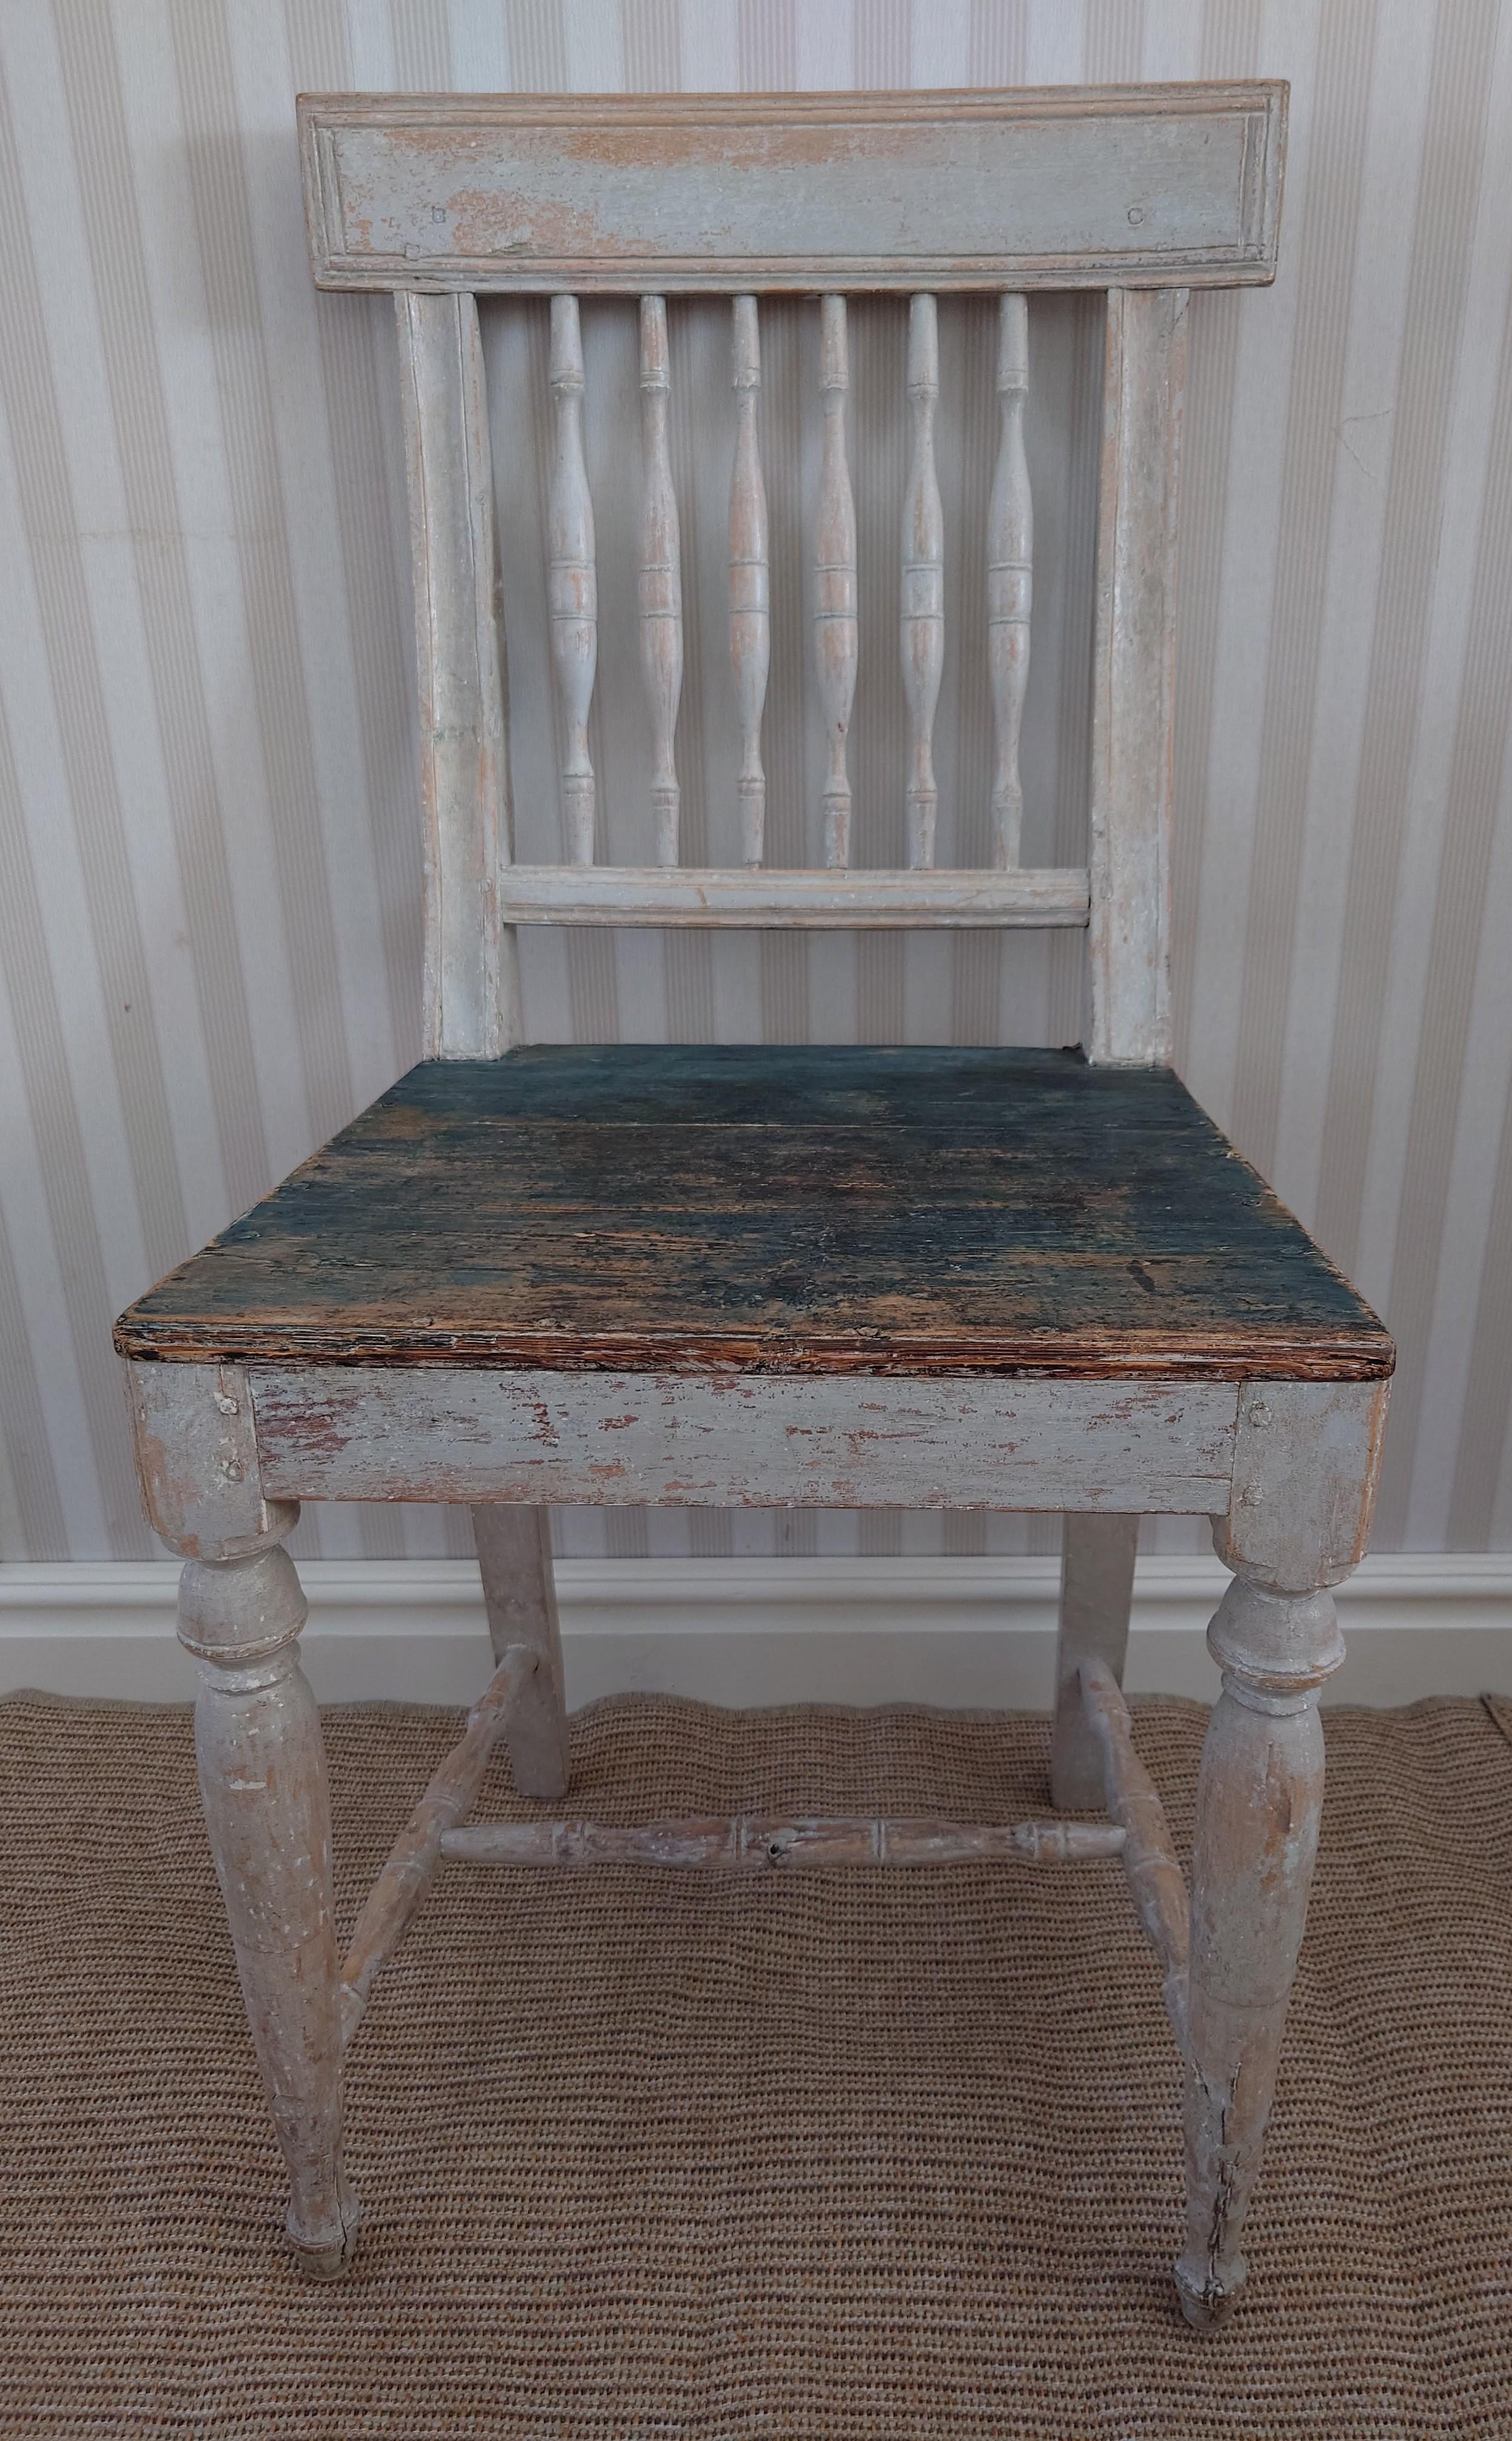 19th century Swedish Gustavian chair from Burträsk Västerbotten, Northern Sweden. The chair is scraped by hand to its well-preserved original painting.
Beautifully carved pilasters in the back of the chair.
The chair is very genuine and has a